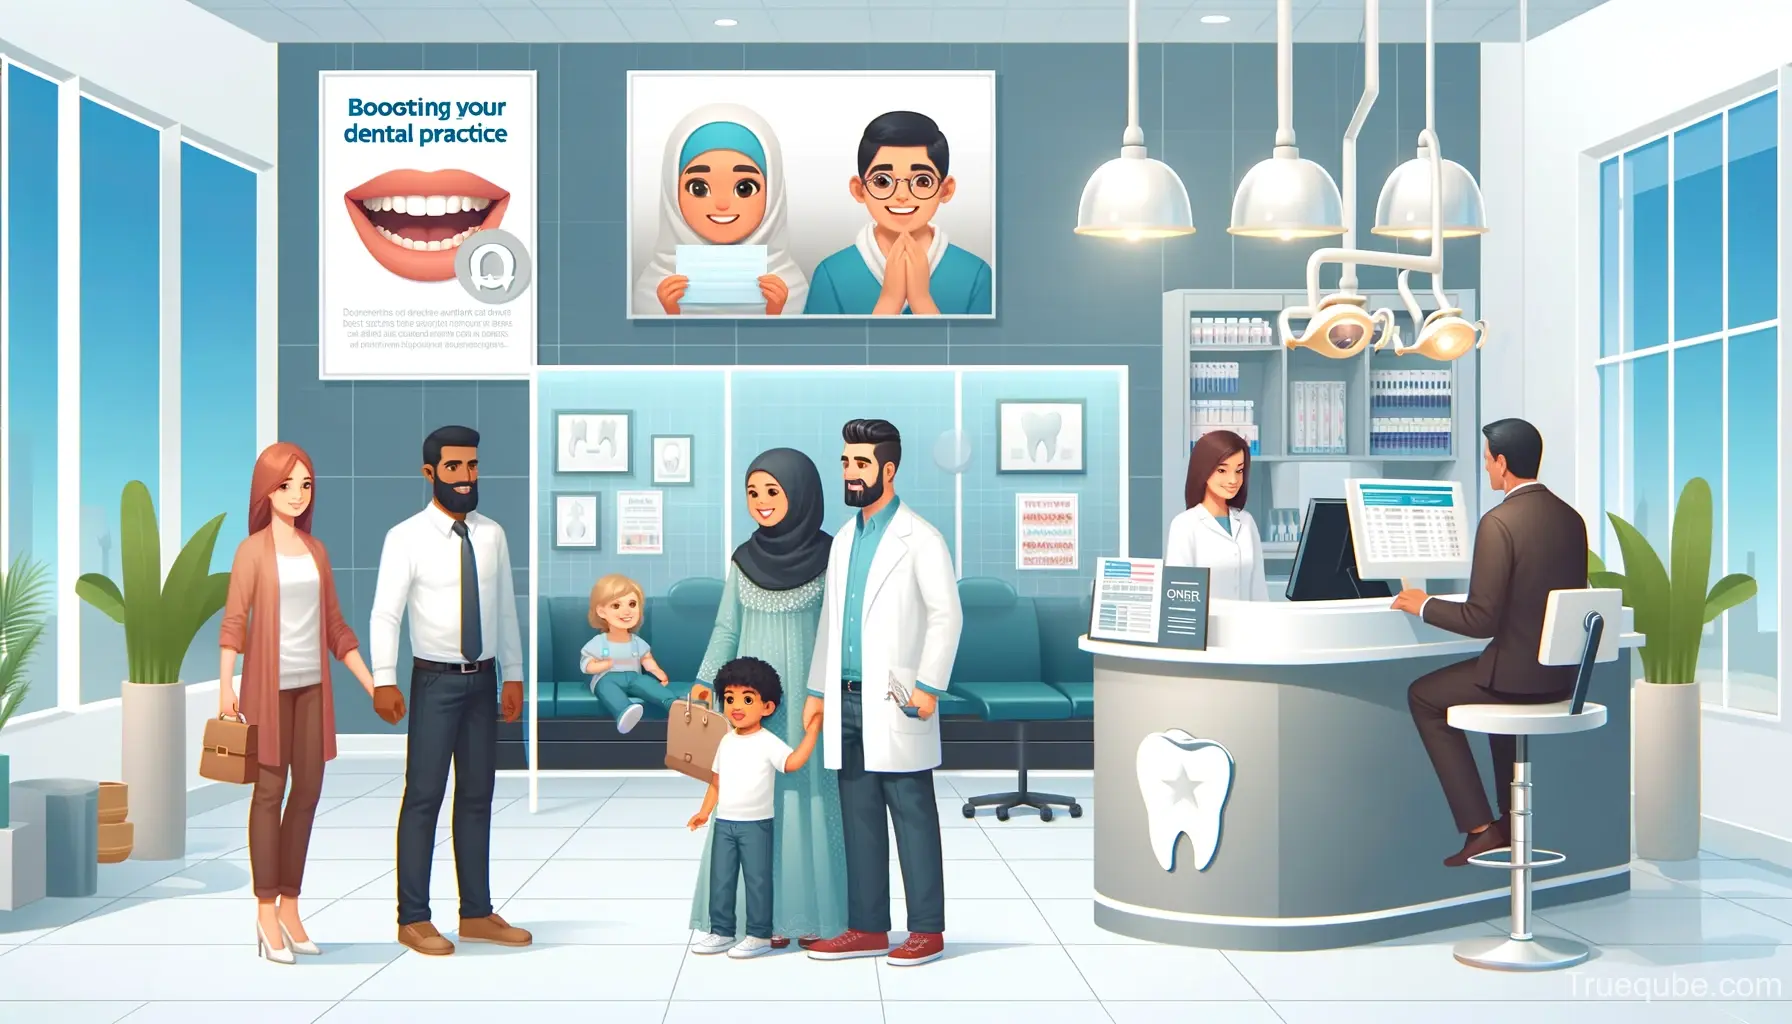 Boosting Your Dental Practice Key Tactics to Gain More Patients